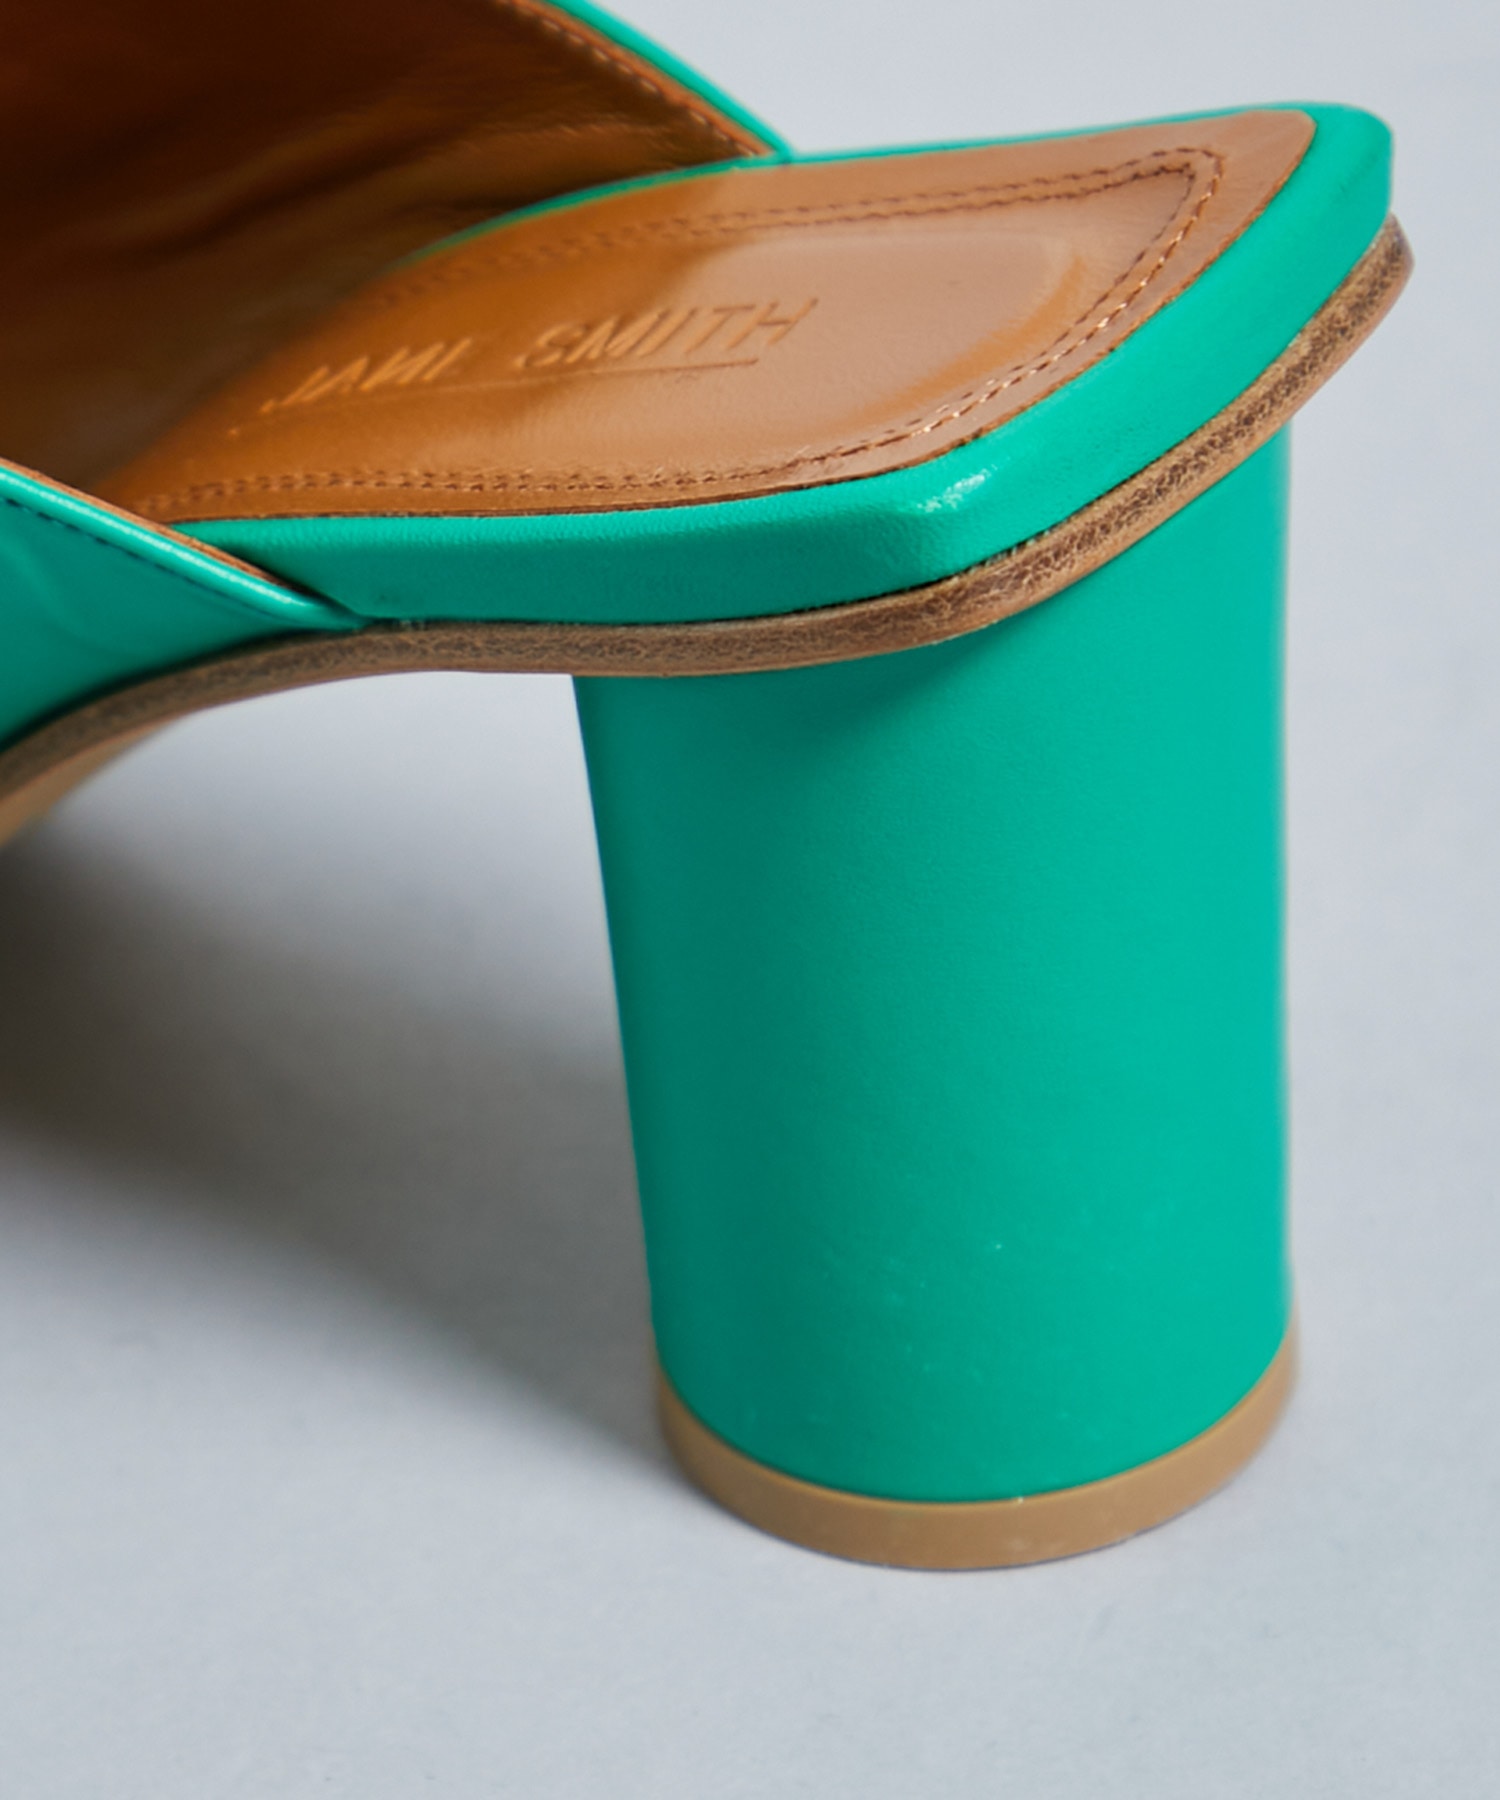 SQUARE TOE SANDALS(36 GREEN): JANE SMITH: WOMENS｜ STUDIOUS ONLINE